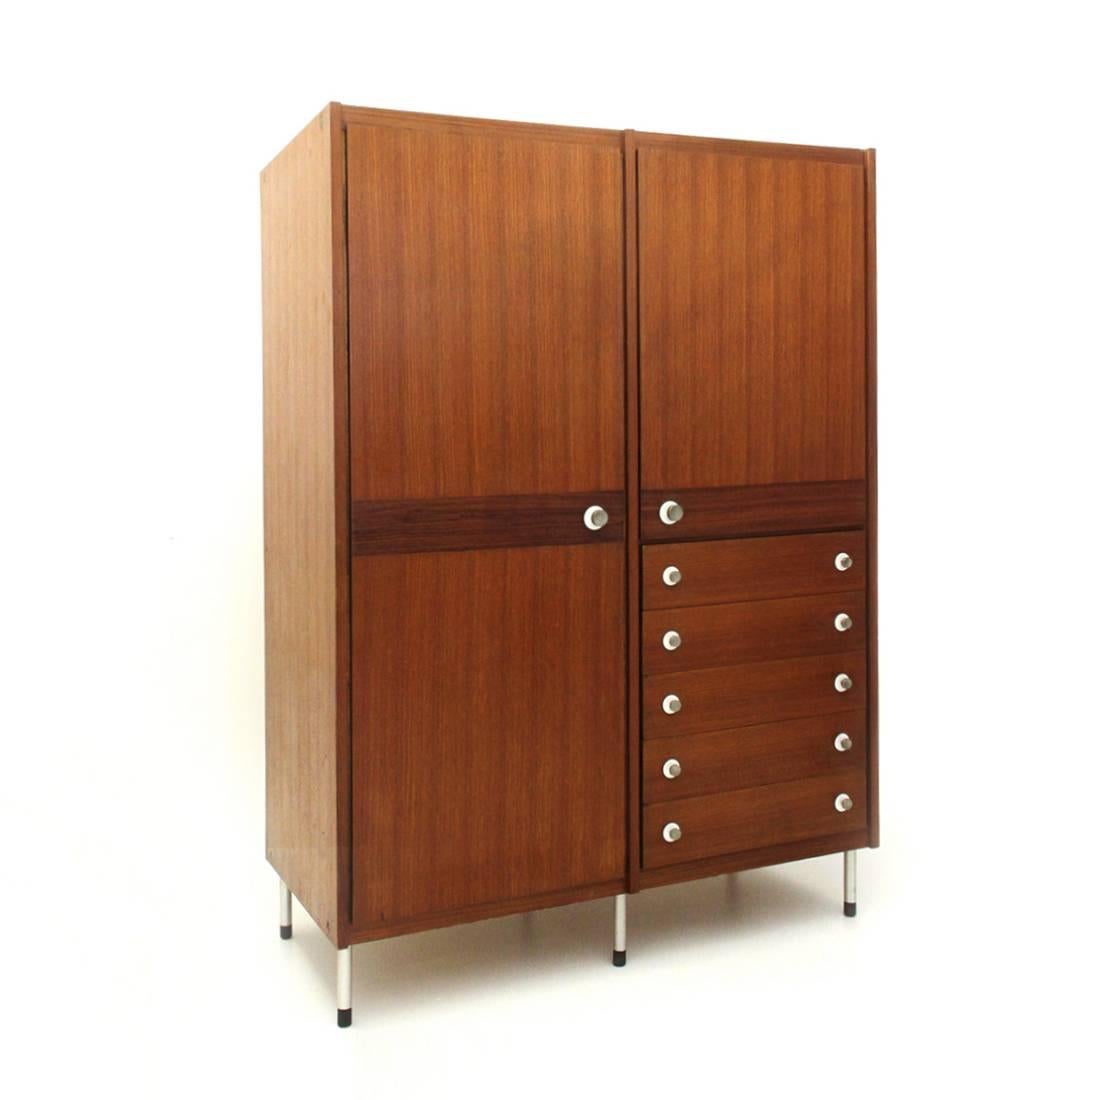 Wardrobe produced by 3V Arredamenti in the 1960s on a project by George Coslin.
Teak veneered wood structure.
Storage compartment for clothes with tie-holder module.
Compartment with shelf.
Five drawers.
Knobs in aluminium with circular insert